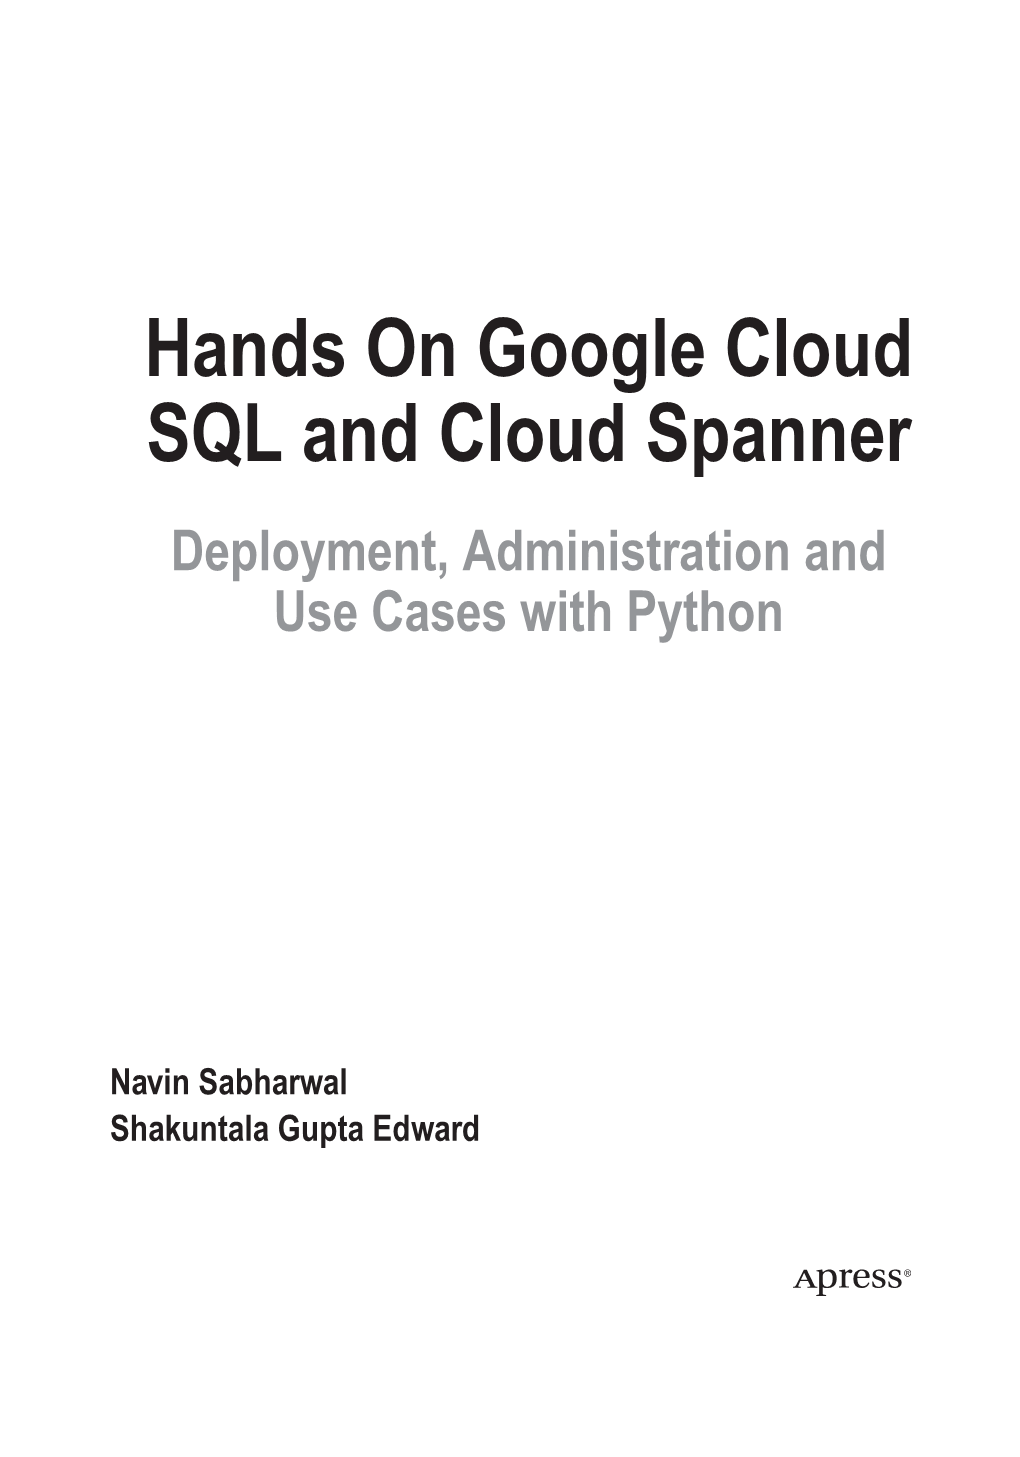 Hands on Google Cloud SQL and Cloud Spanner Deployment, Administration and Use Cases with Python